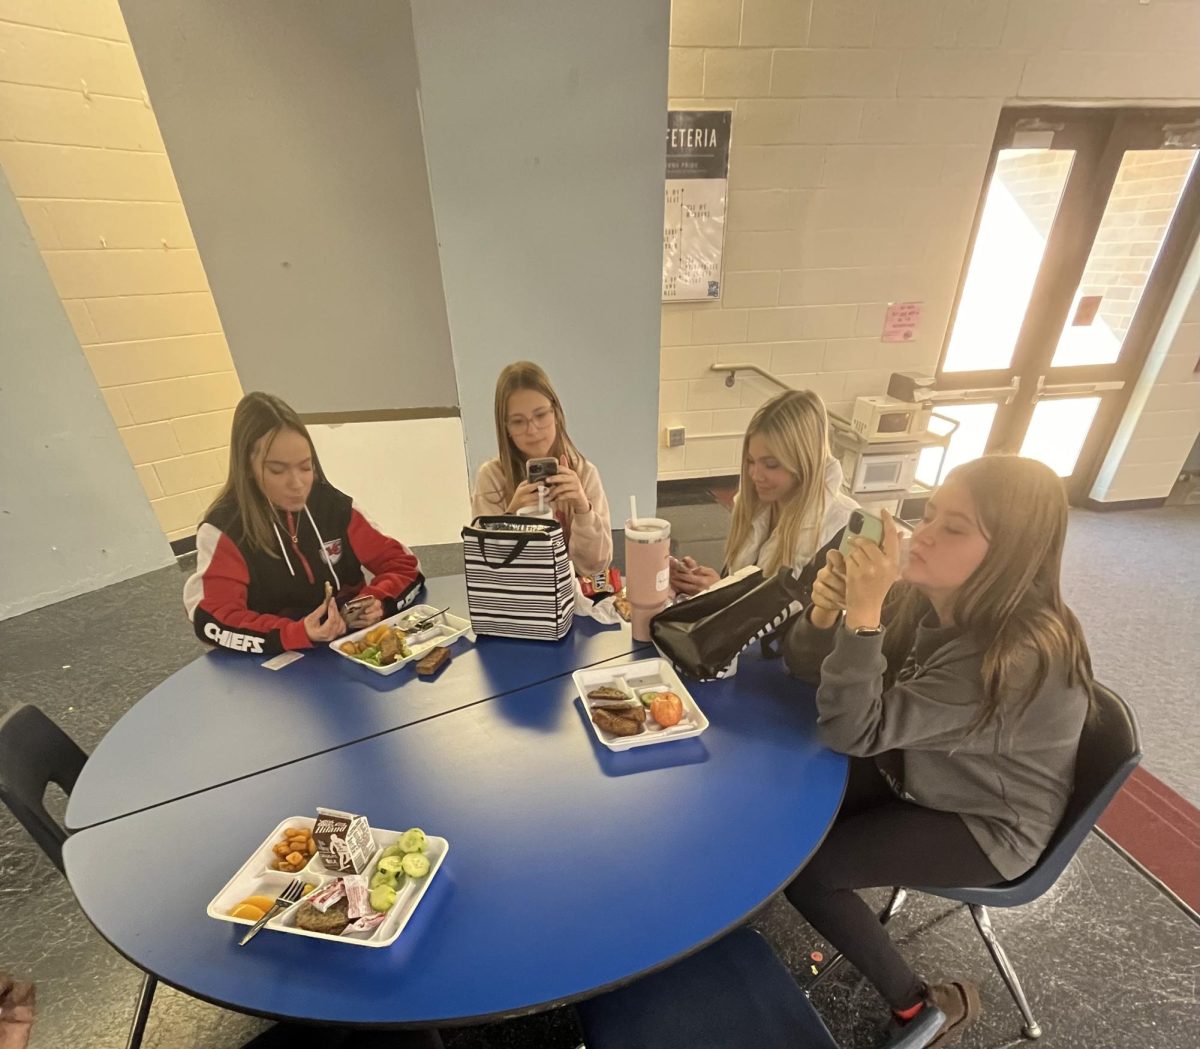 Kinley Martinek. Blakley Walter, Averi Broxterman, and Giuliana Dawkins, sit at a table during lunch, all disconnected with each other on their phones.